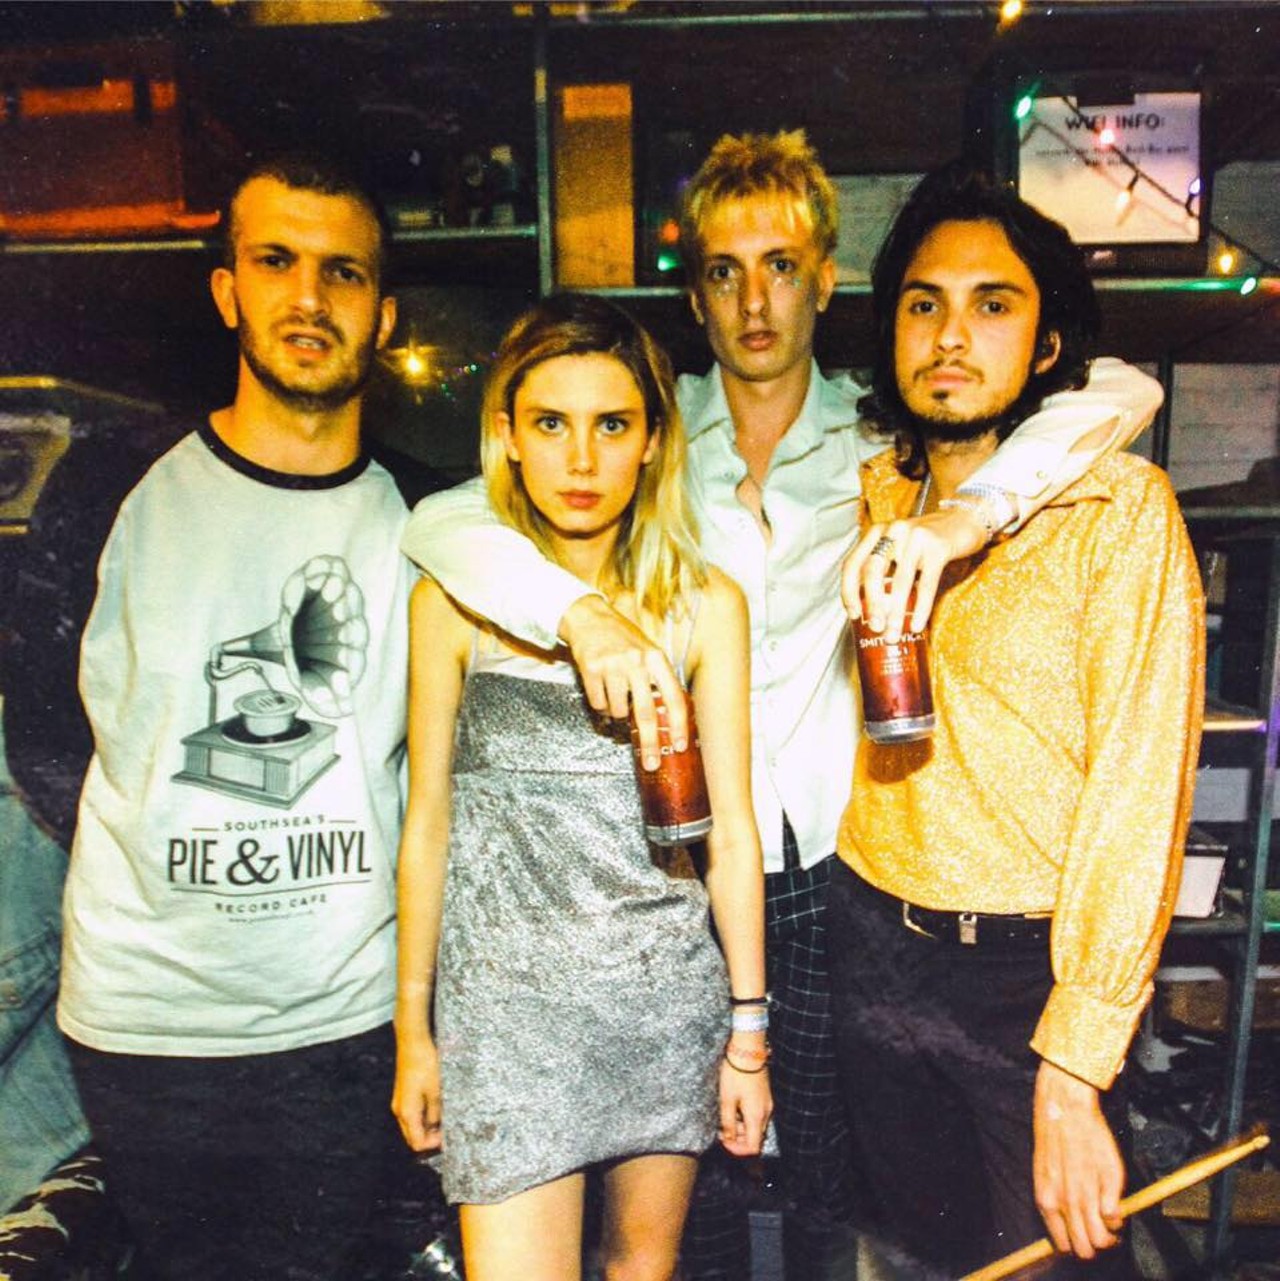 Wolf Alice
The four-piece alternative band released their debut EP back in 2013, but things really got turning when their debut album came out in 2015. They are a mix of grunge and alternative that is reminiscent of Seattle in the 90&#146;s, except it&#146;s 2015 and this band is from the UK. Lead singer Ellie Roswell is not only an amazing vocalist, but one hell of a guitar player, too. They were also nominated for a Grammy at this year&#146;s past ceremony. 
Essential tracks: &#147;Moaning Lisa Smile,&#148; &#147;Fluffy,&#148; and &#147;Giant Peach.&#148;